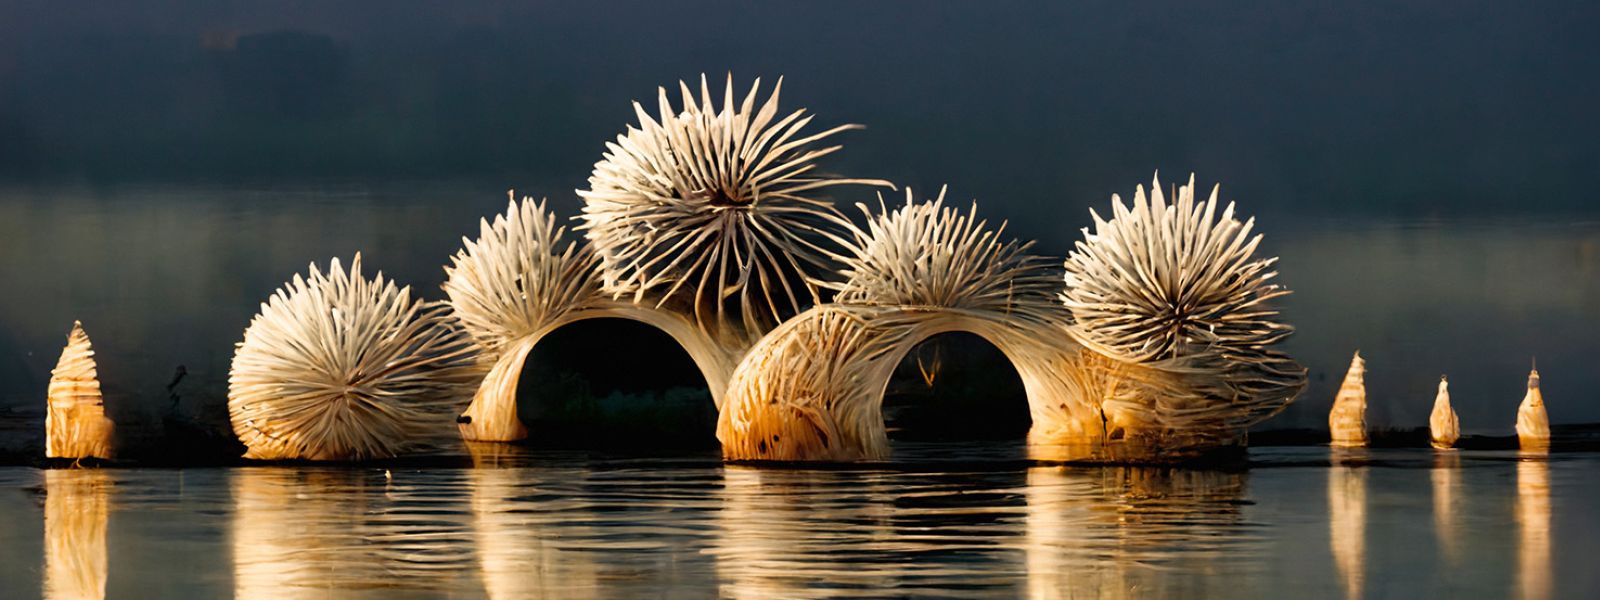 Image created by KI on the subject of the exhibition „BioInspiration" at Technisches Museum Wien, picturing sea and a fantastic building, made of forms, resembling sea hedgehogs.